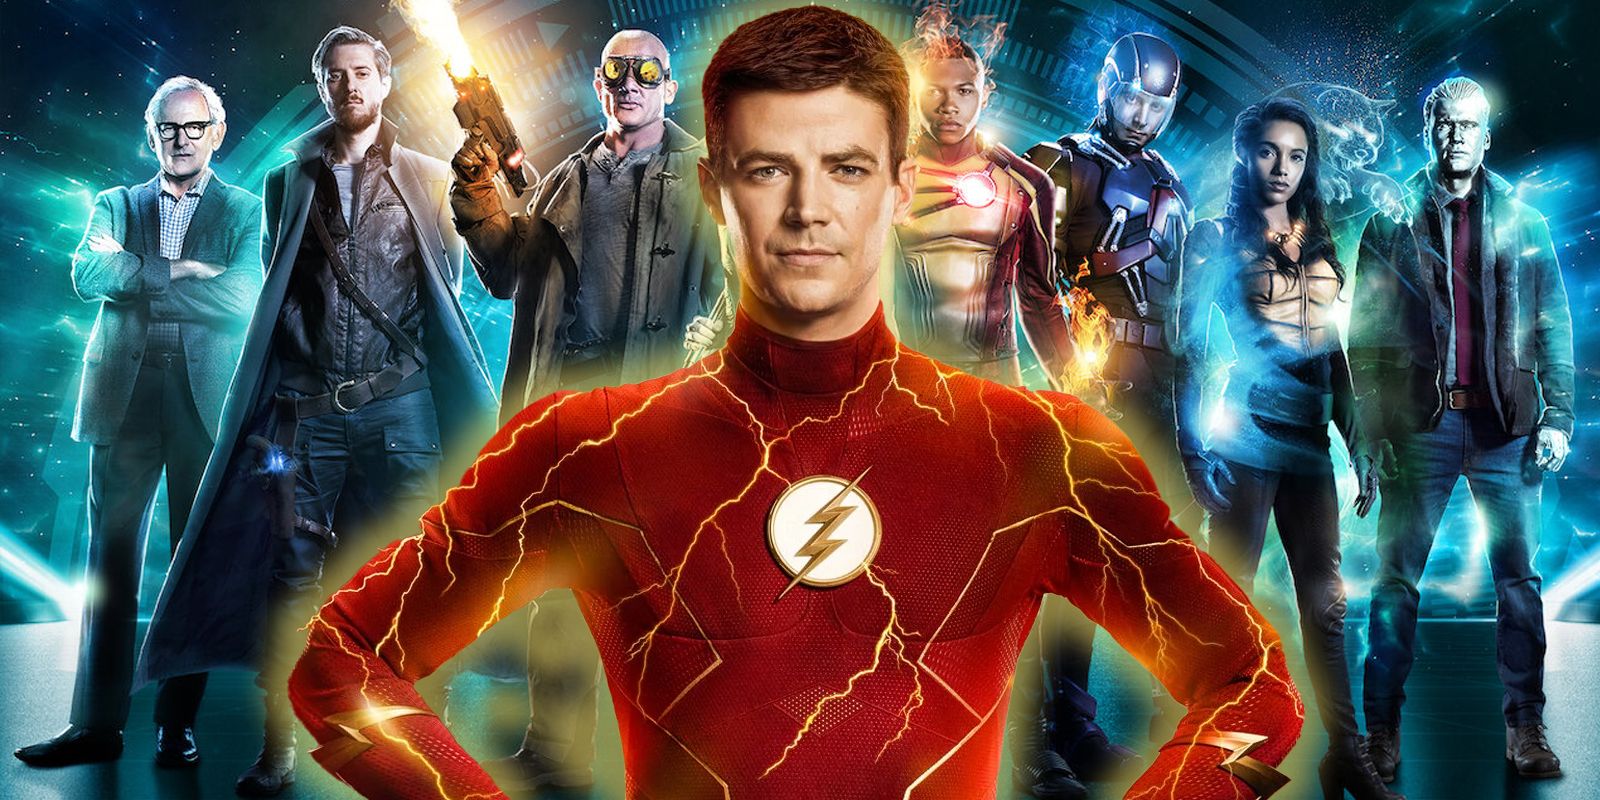 The Flash Legends of Tomorrow